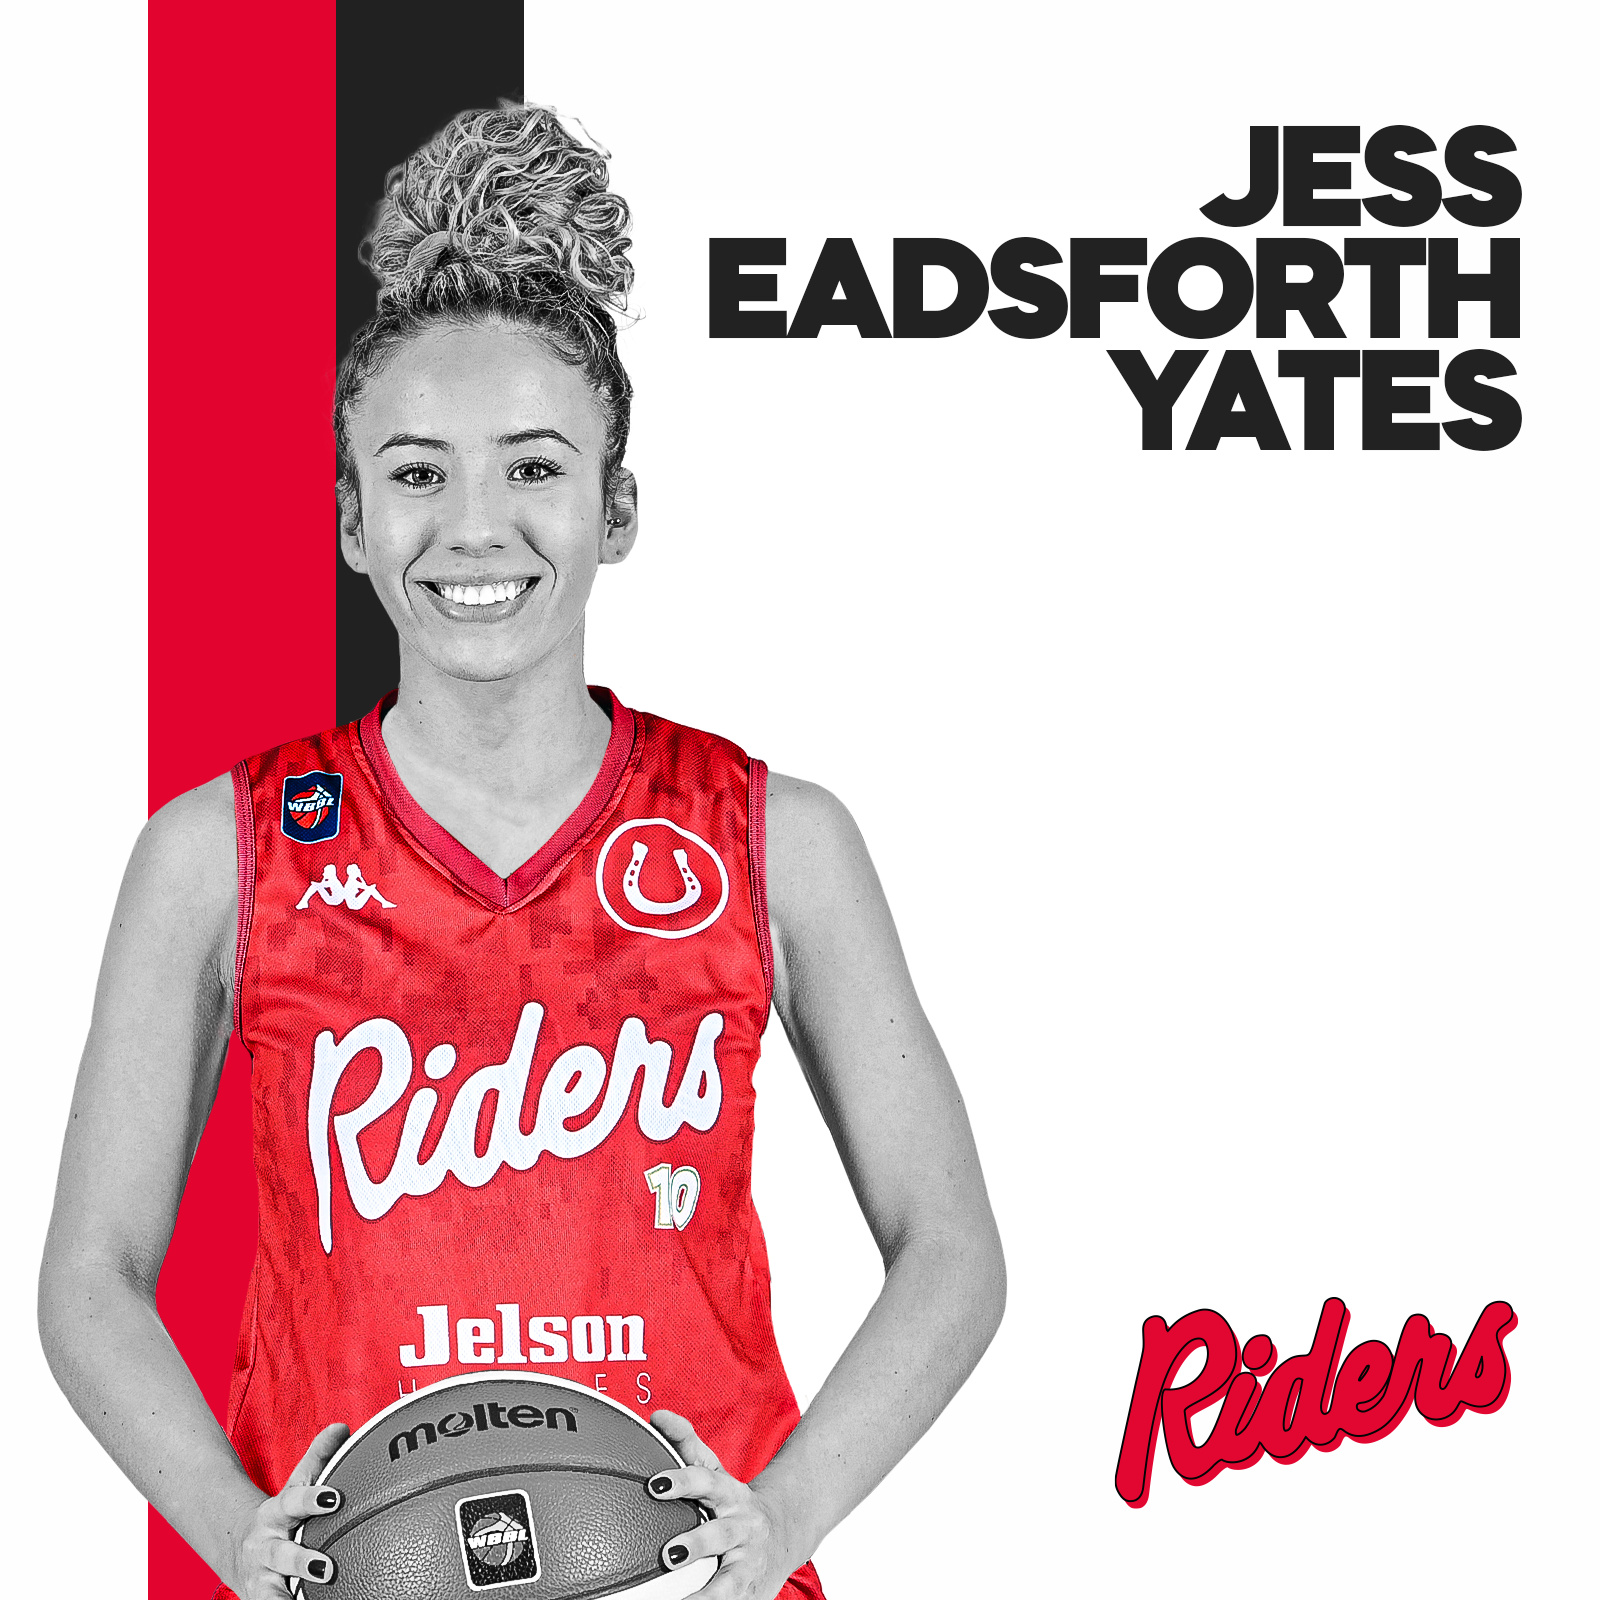 Eadsforth-Yates in Riders Switch